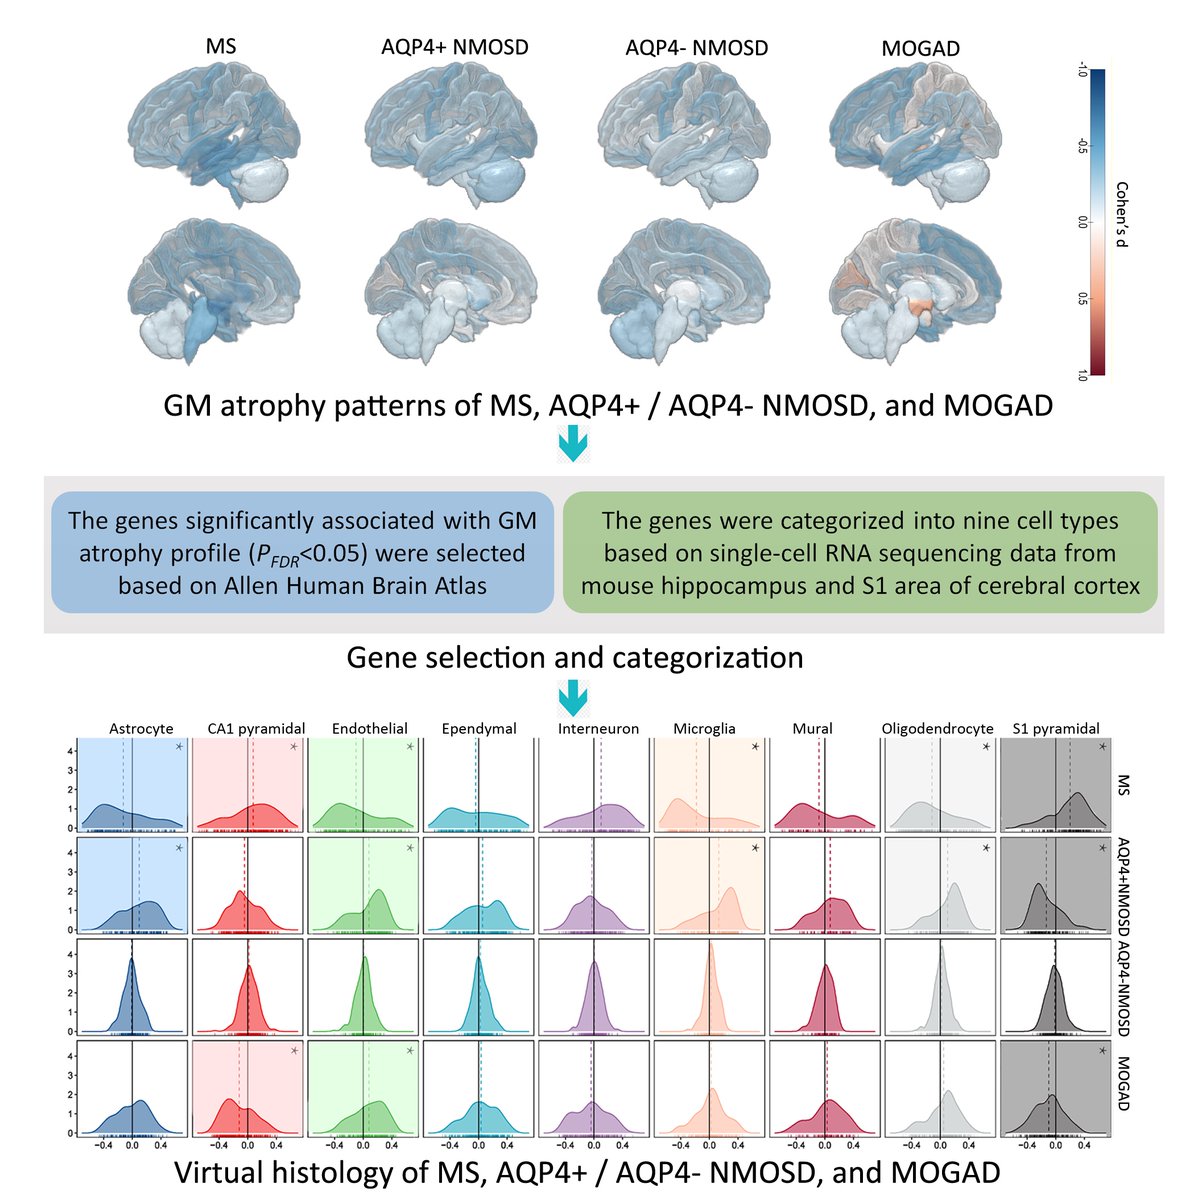 Sun et al. use a virtual histology approach to assess the pathophysiological basis of interregional differences in grey matter atrophy patterns in patients with multiple sclerosis, AQP4+ and AQP4- subtypes of NMOSD, and MOGAD. tinyurl.com/y324cv8m